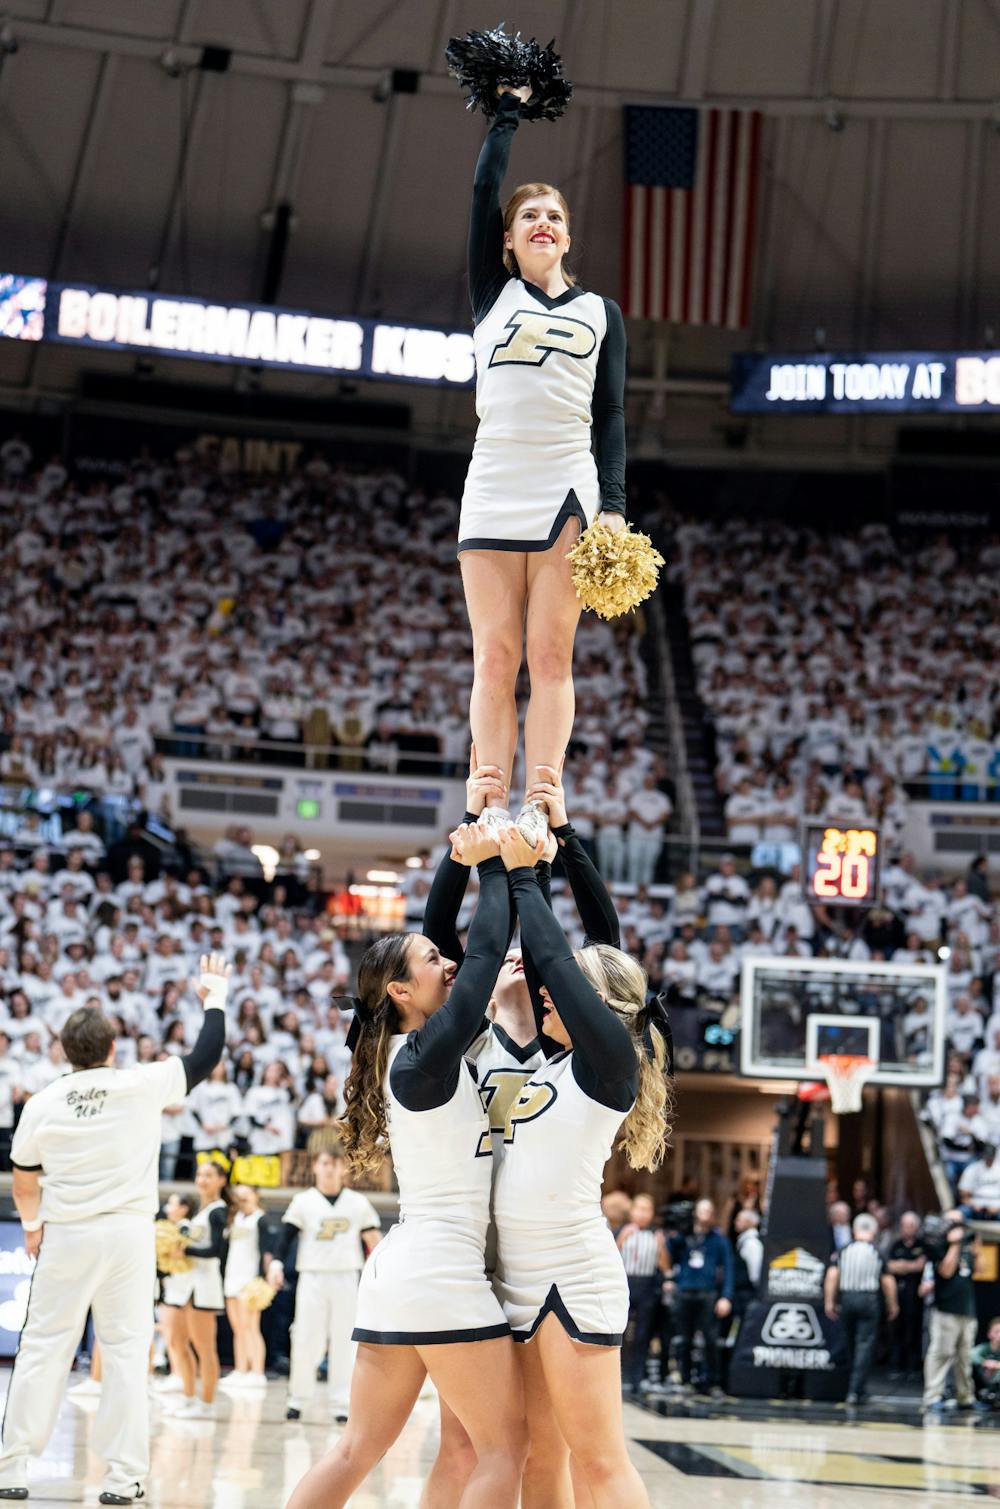 <p>The Purdue Cheerleading team cheers on the men's basketball team and hypes up the crowd during a game against MSU at Mackey Arena on Jan. 29, 2023. The Spartans lost to the Boilermakers 77-61.</p>